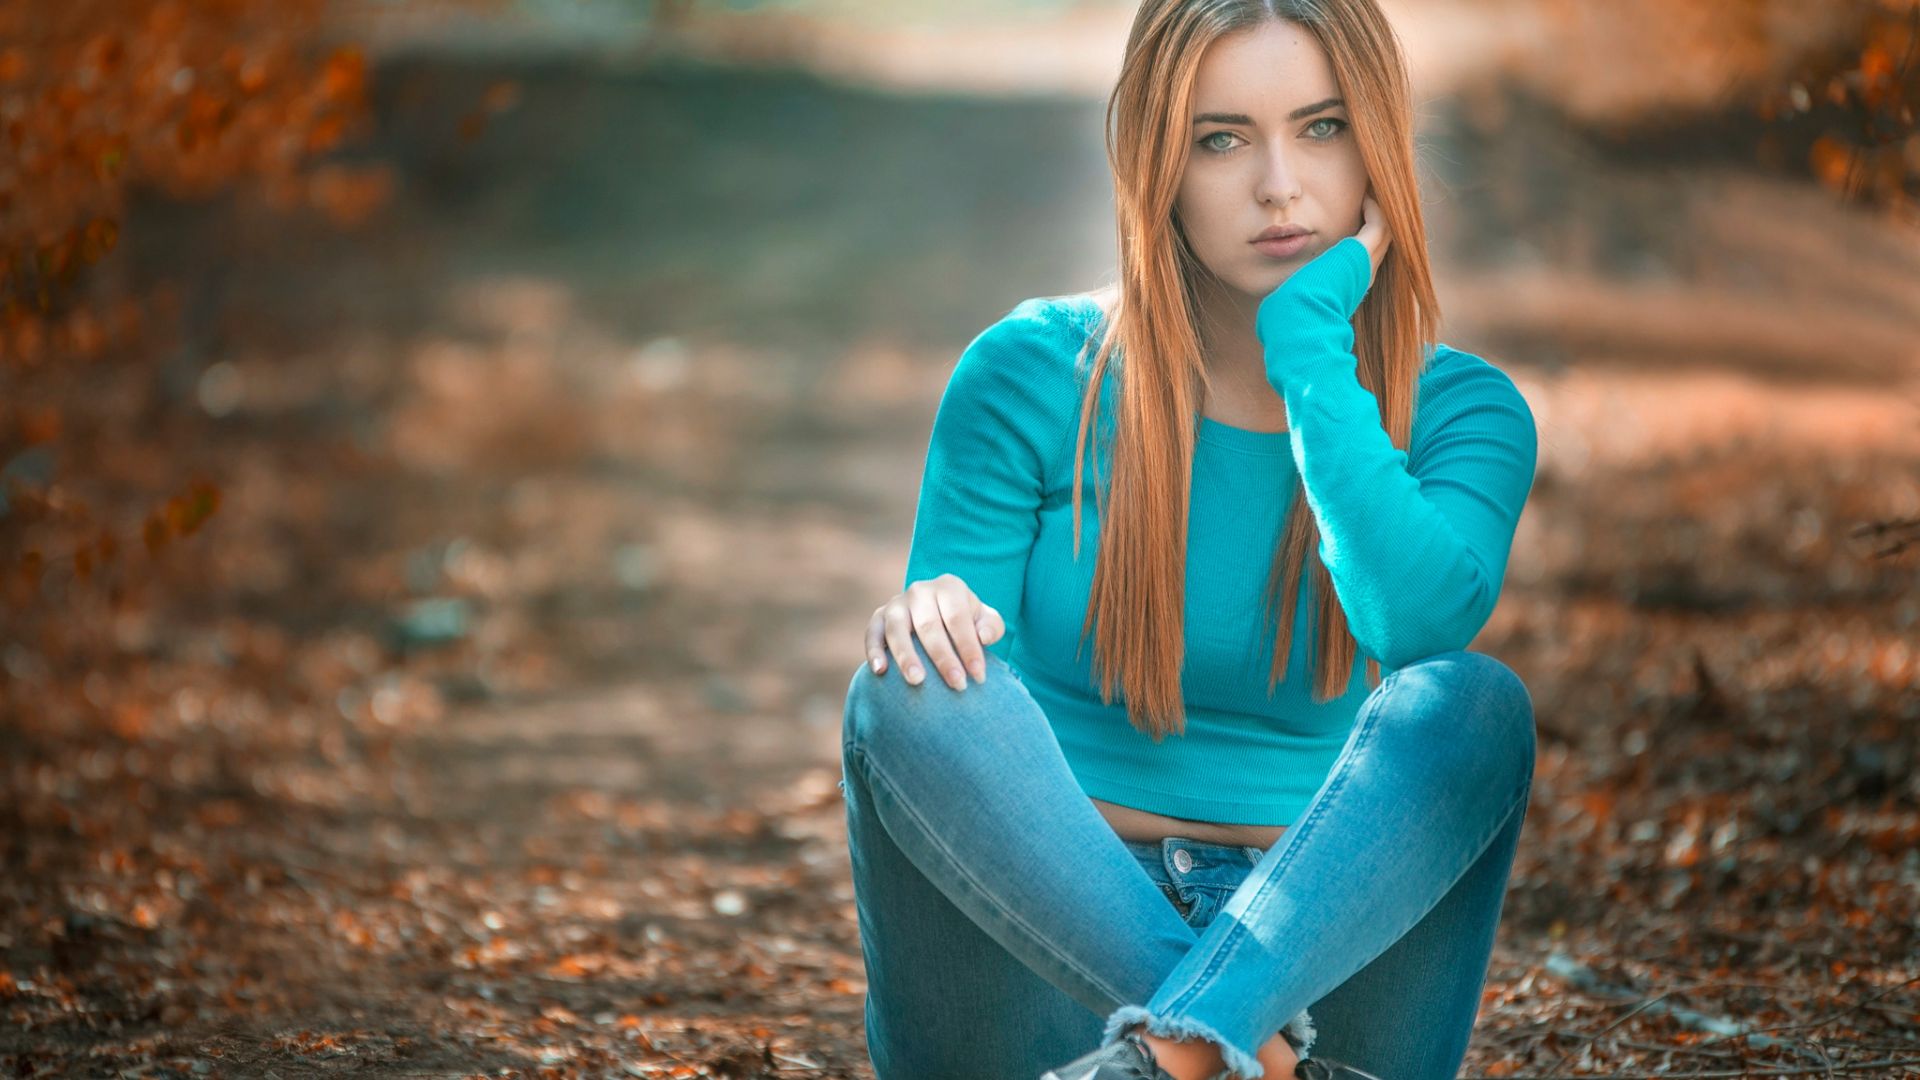 Wallpaper Red head, jeans, outdoor, sit